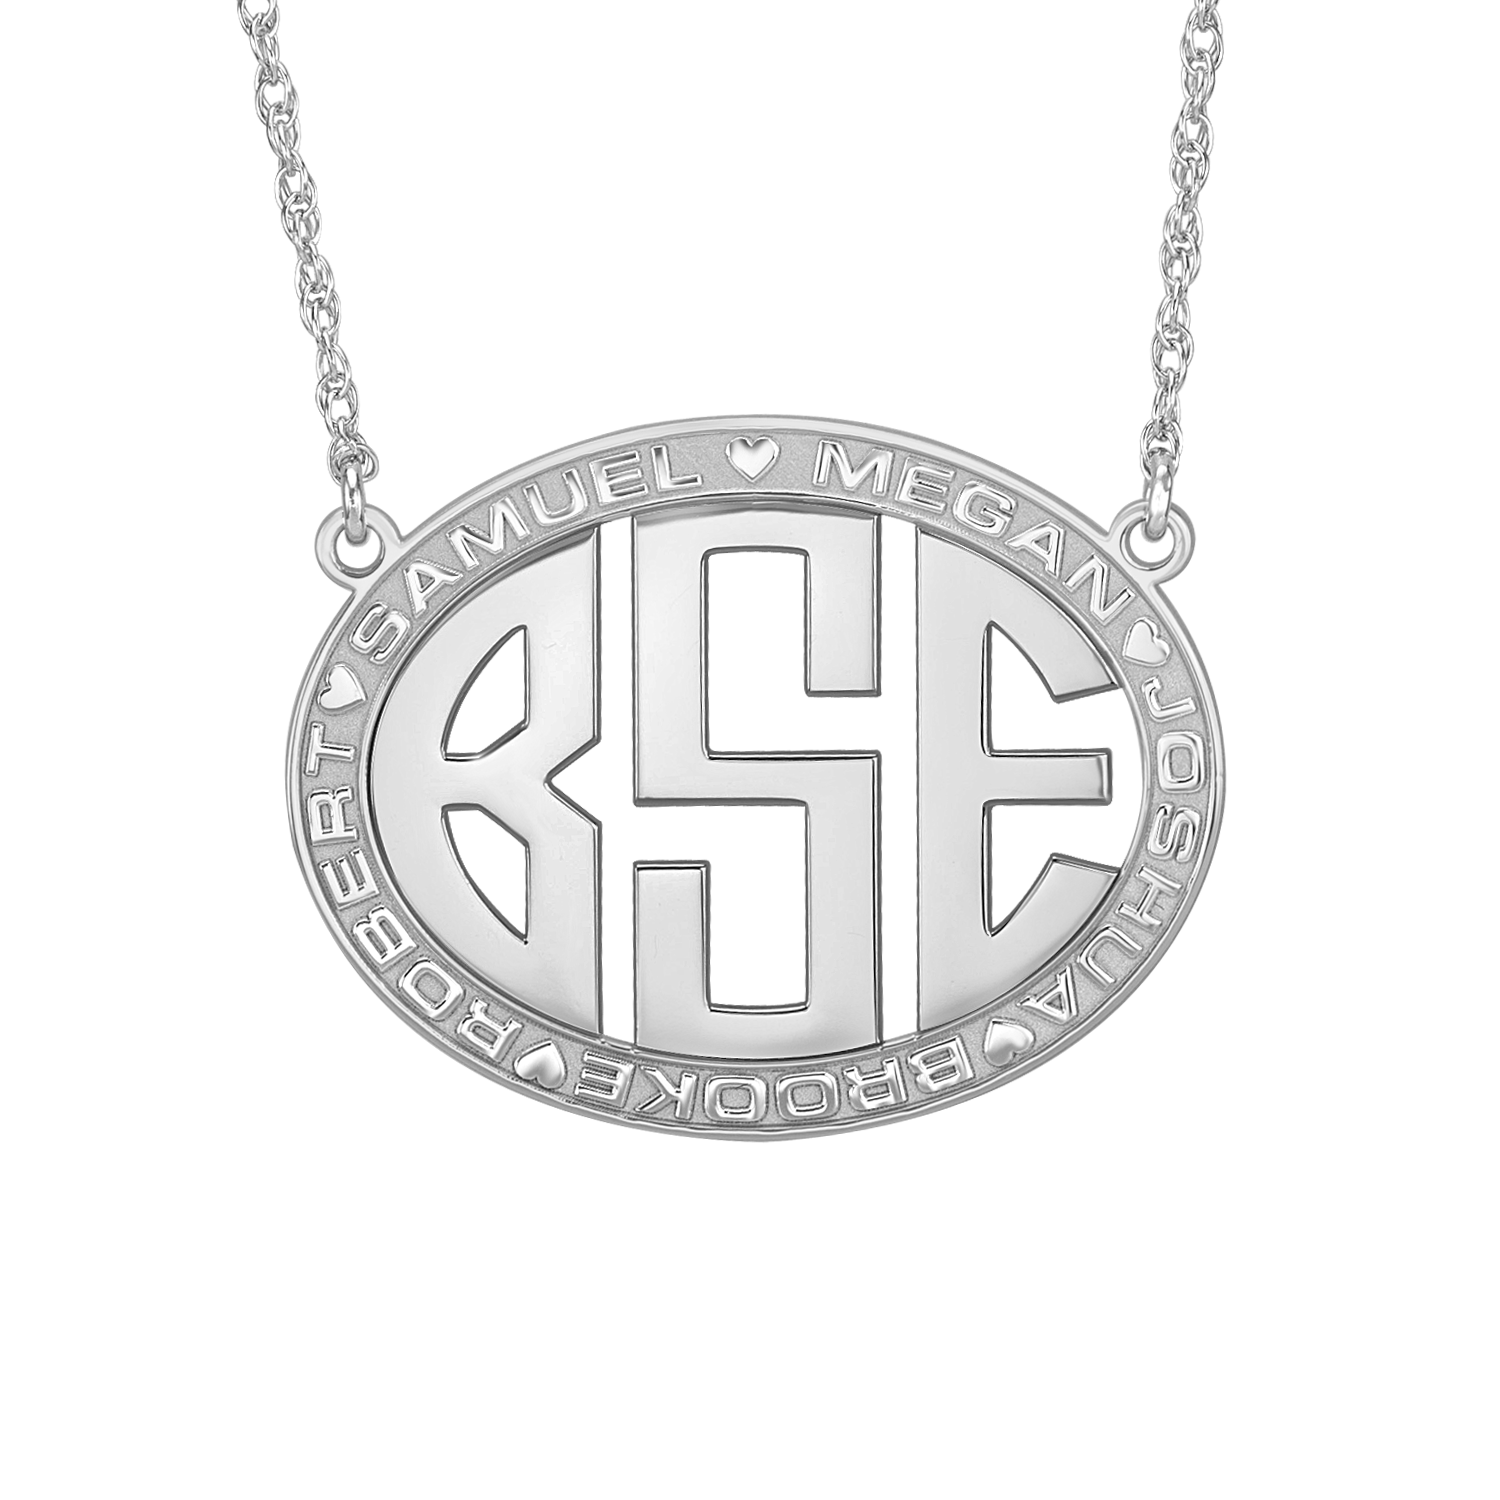 Silver Monogram Mothers Necklace